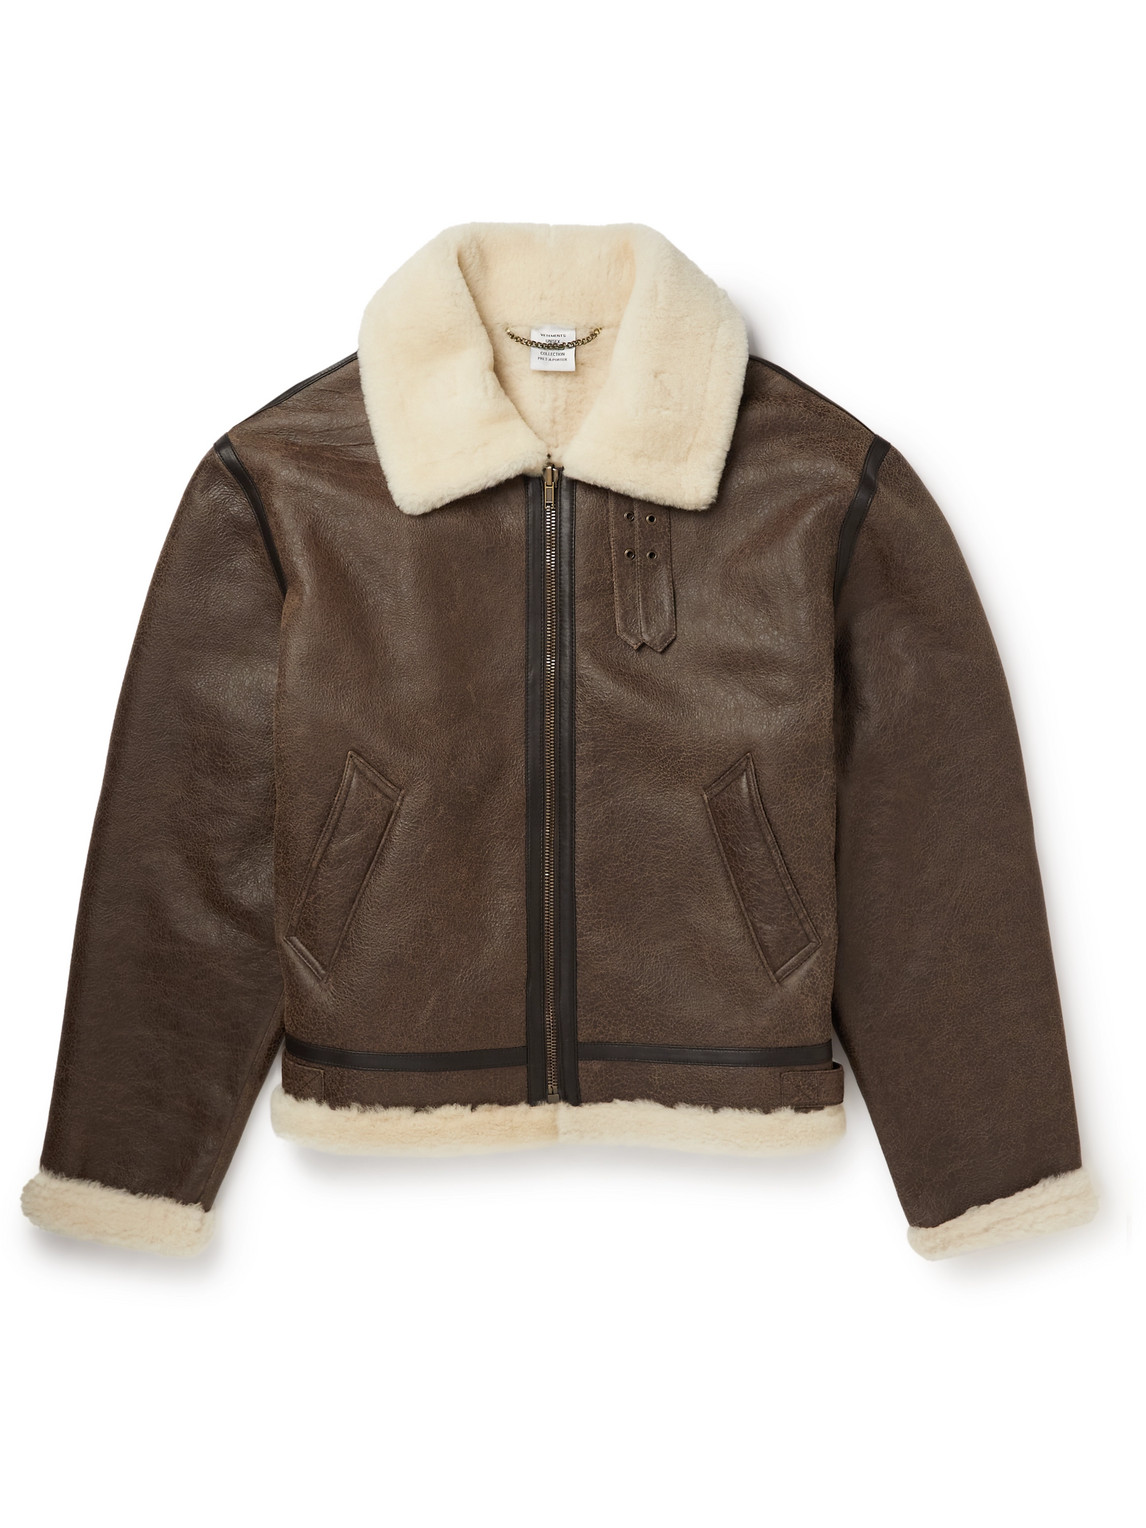 VETEMENTS Shearling-Lined Distressed Leather Jacket